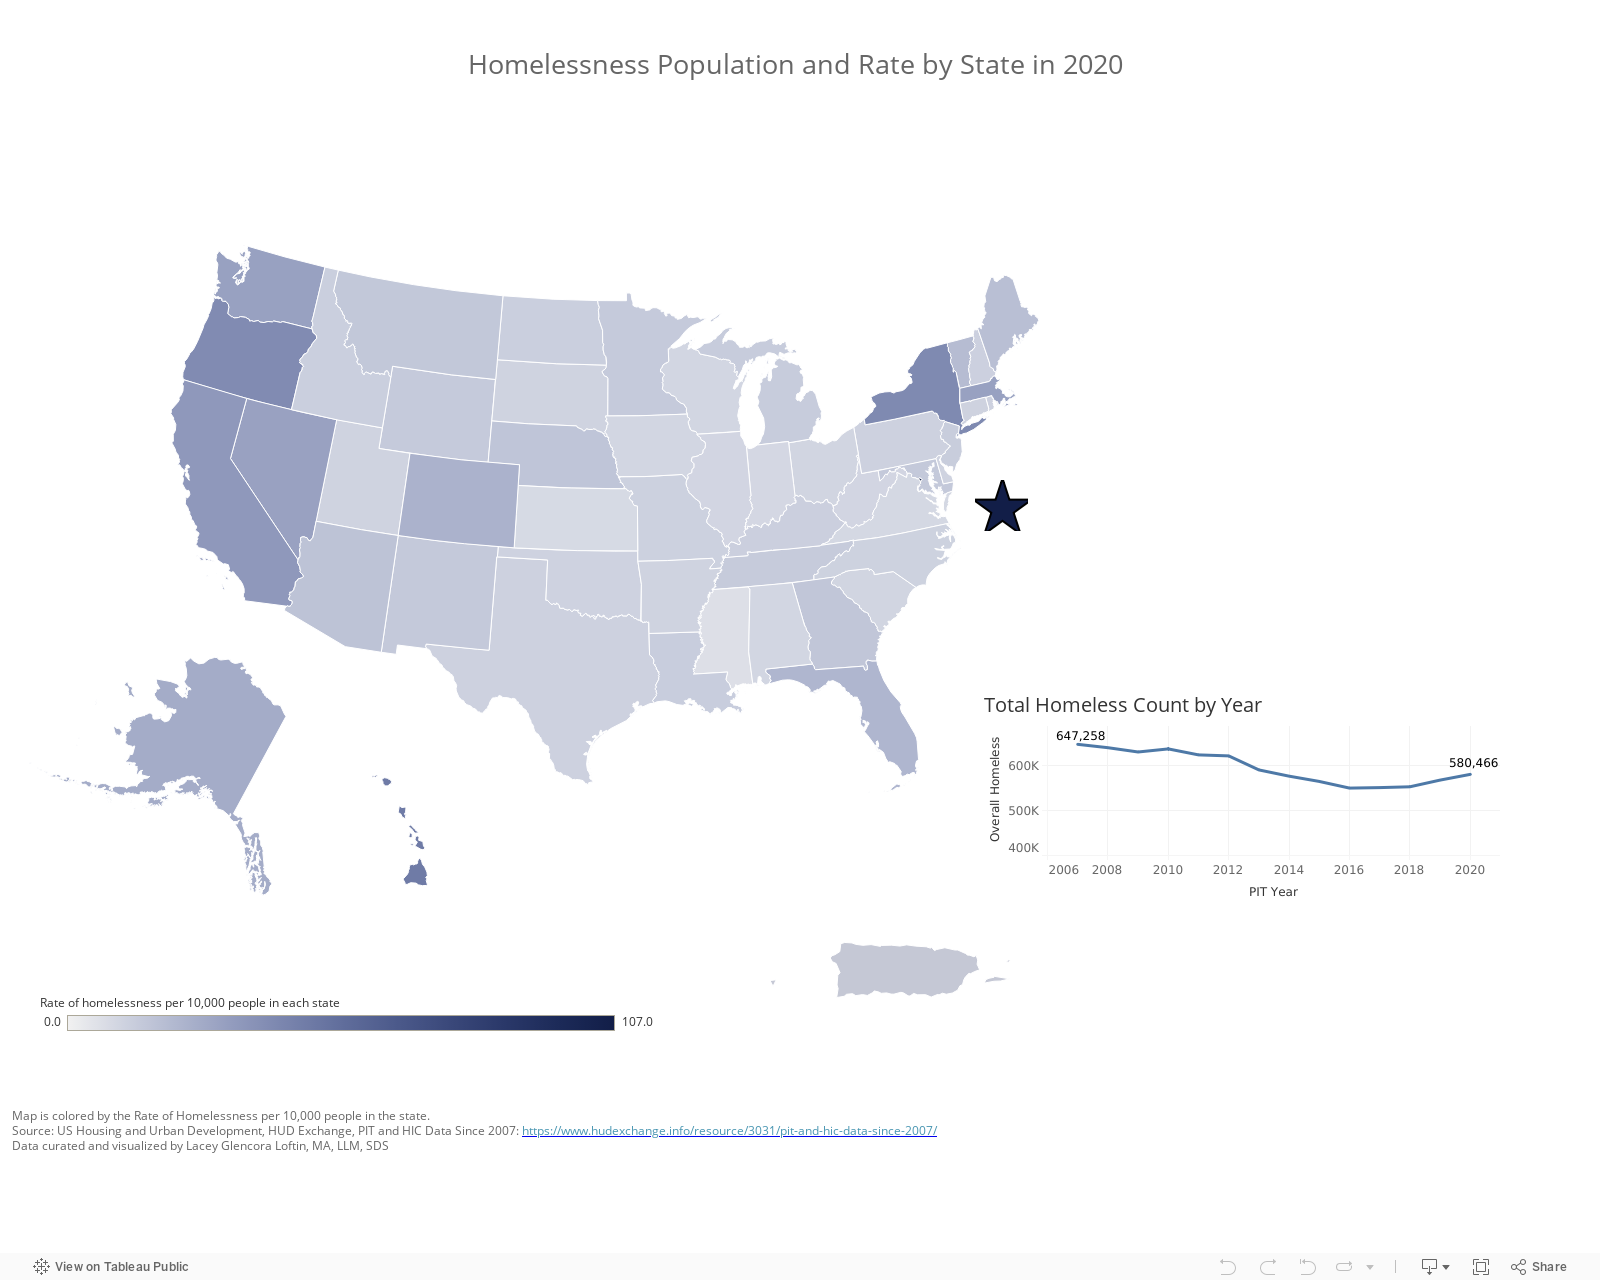 Homeless Population and Rate 